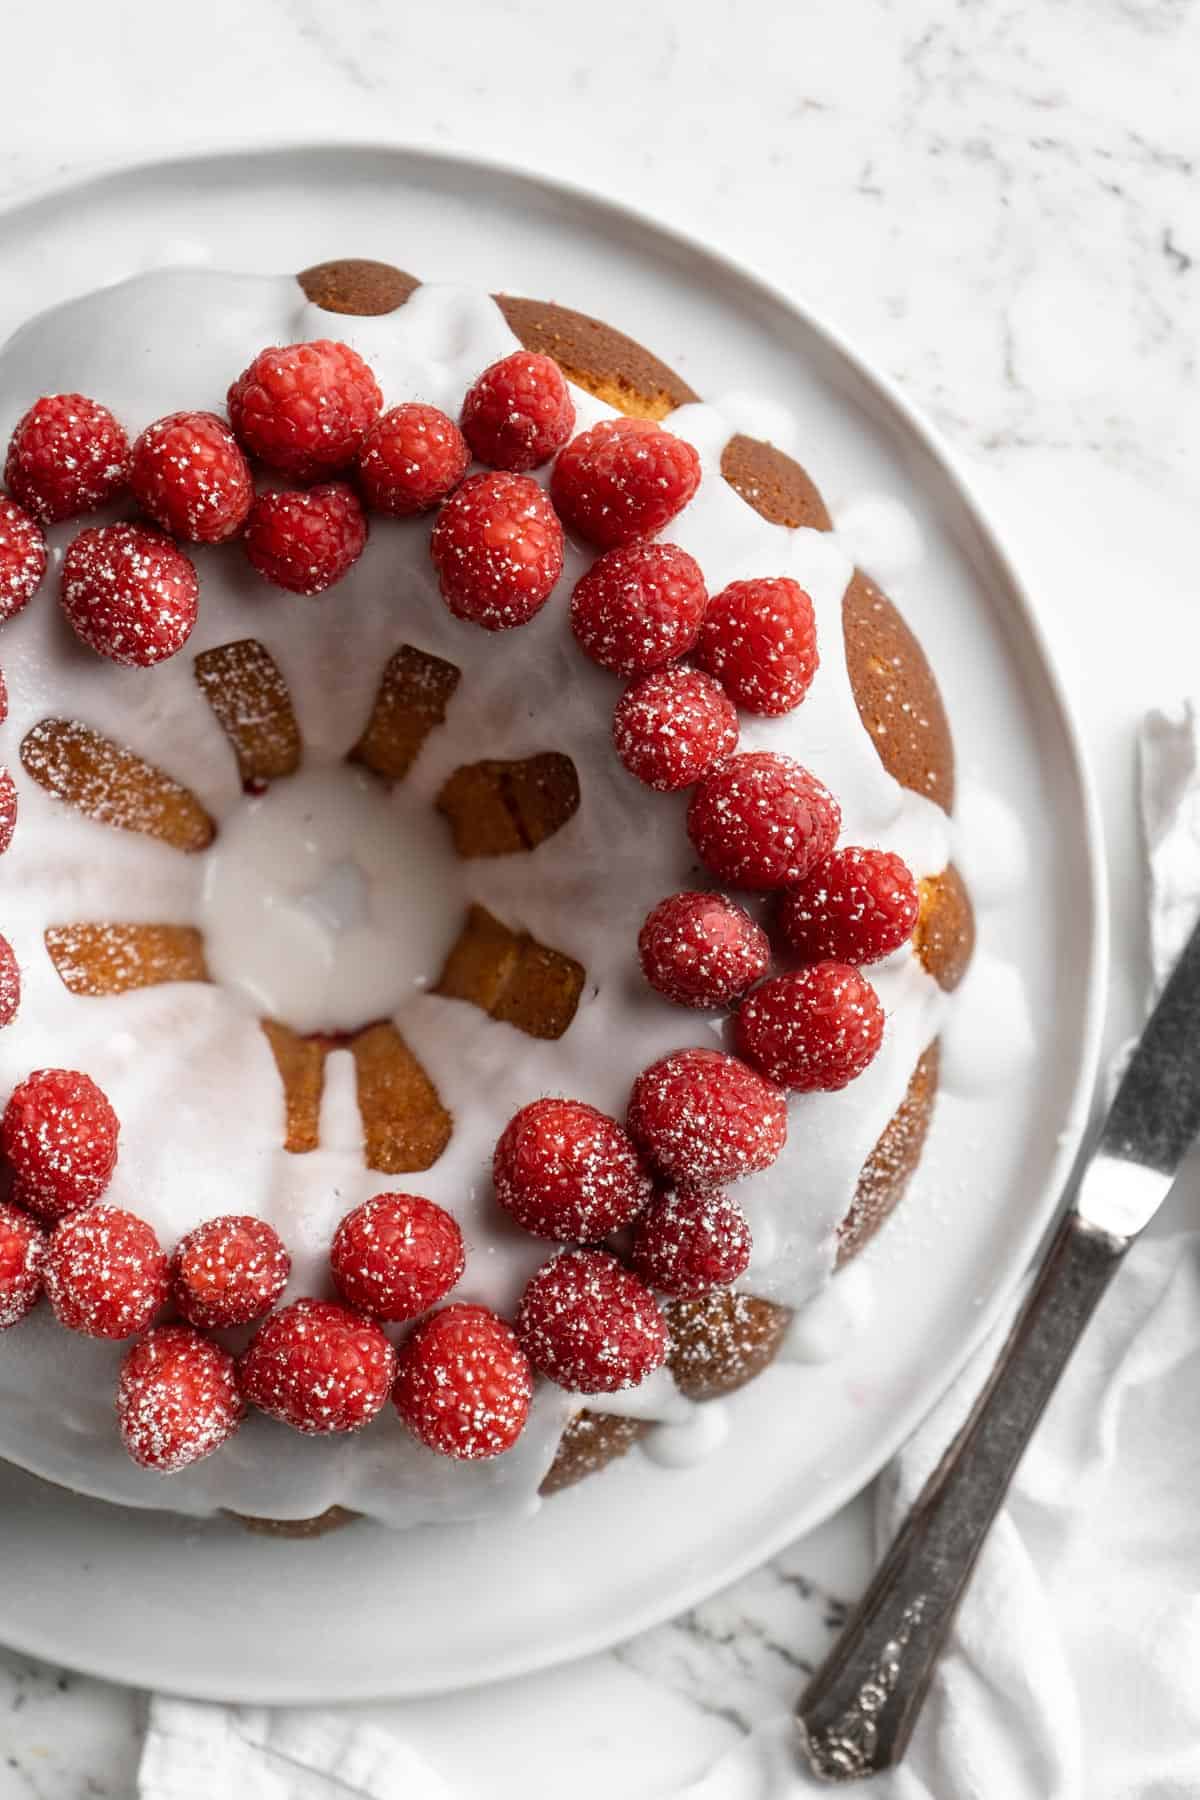 Overhead shot of the white chocolate raspberry bundt cake on a white plate with a knife next to it